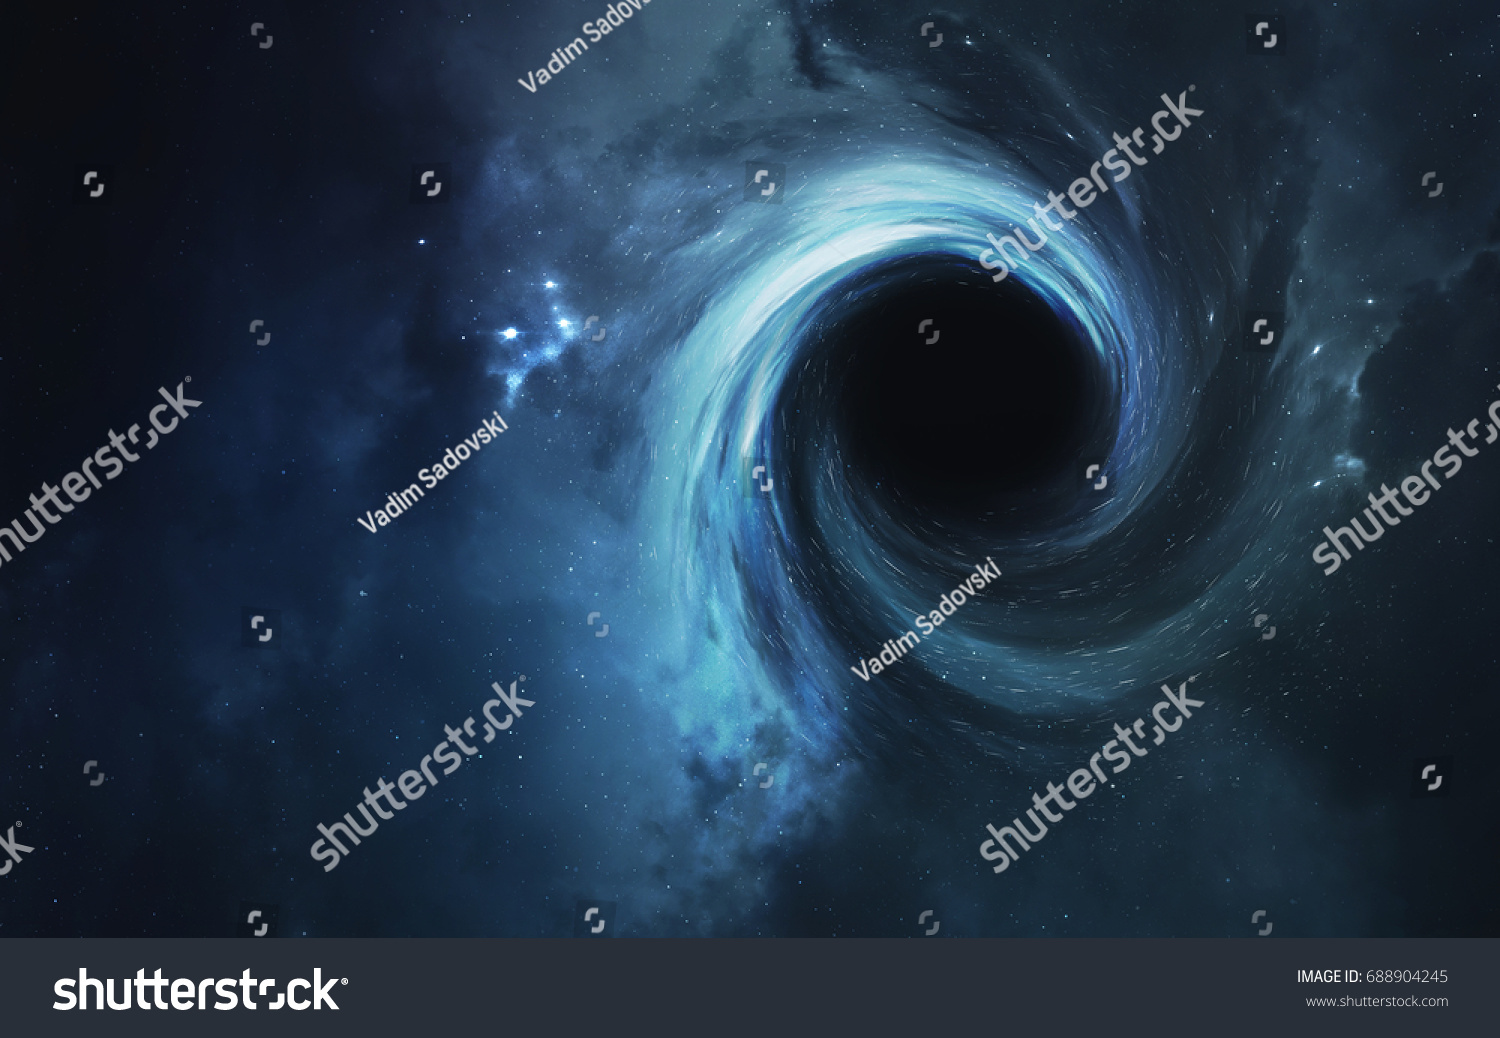 Black hole. Abstract space wallpaper. Universe filled with stars #688904245